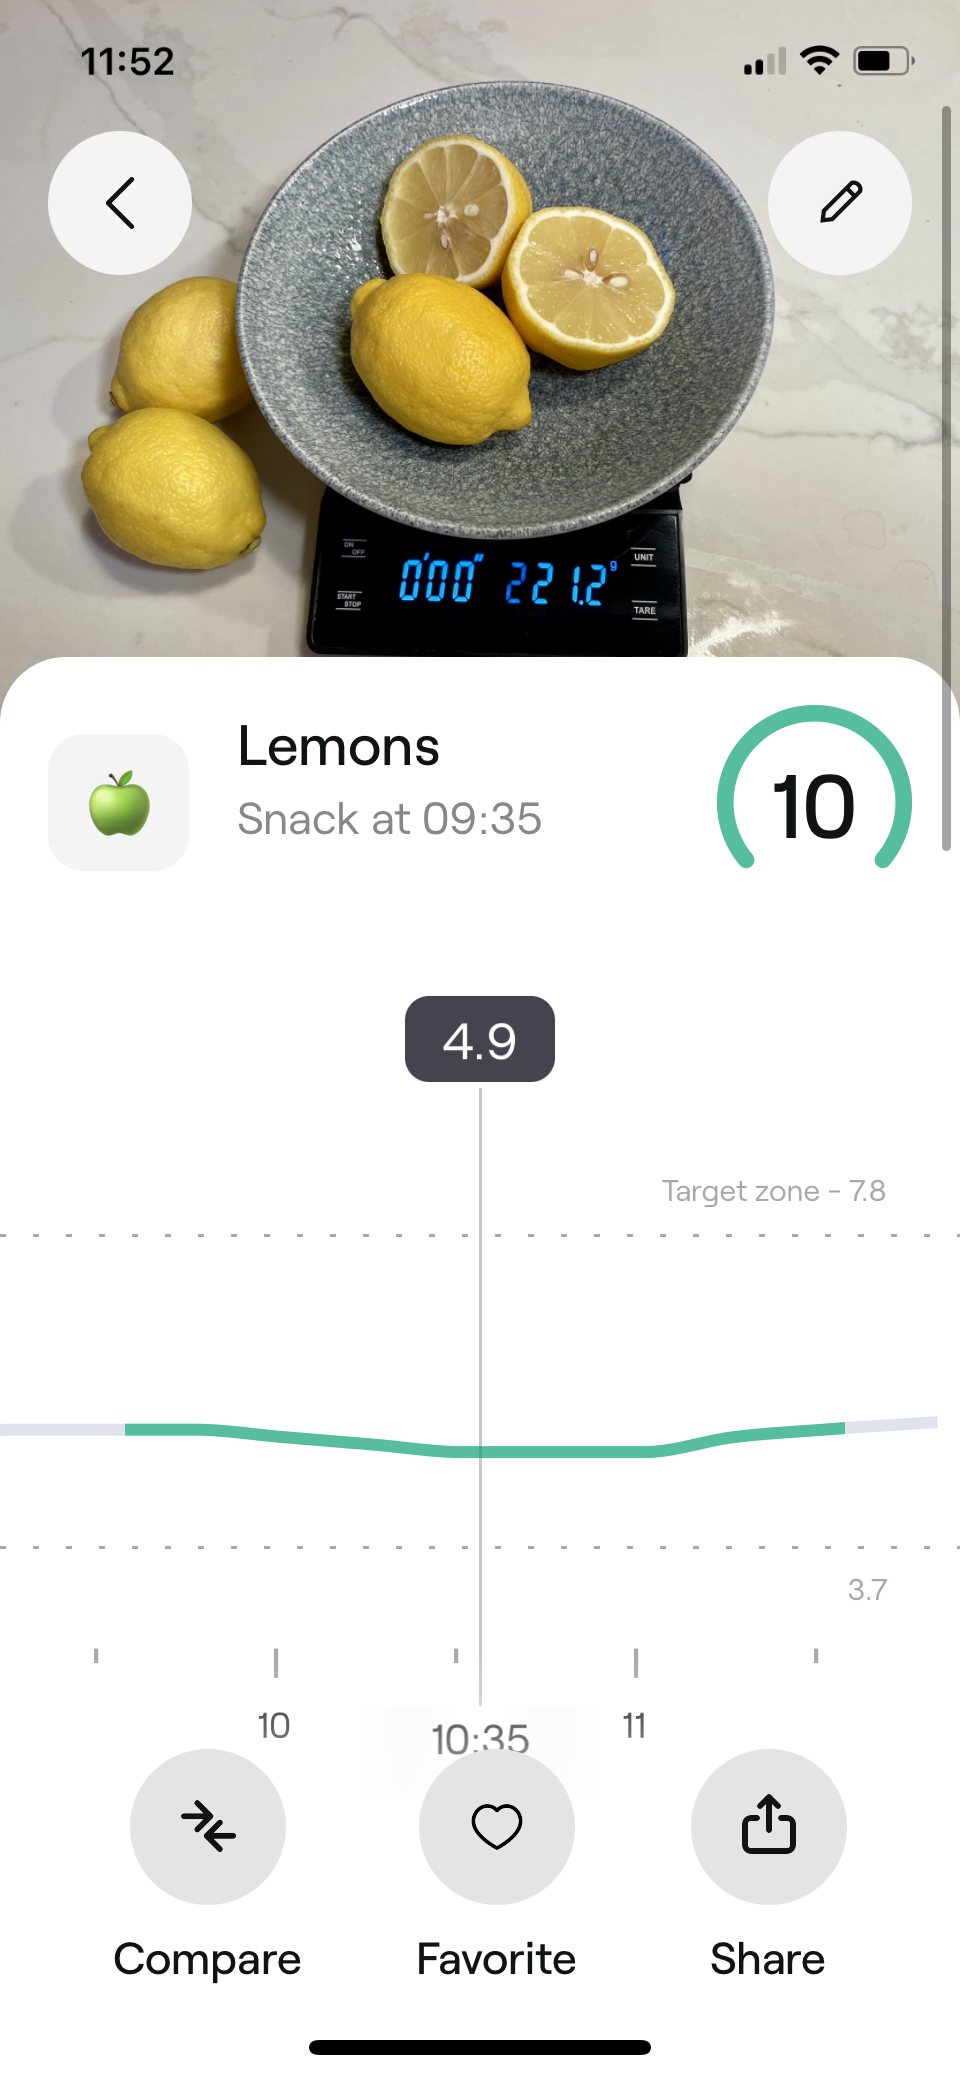 Lemons. Experiment by our expert